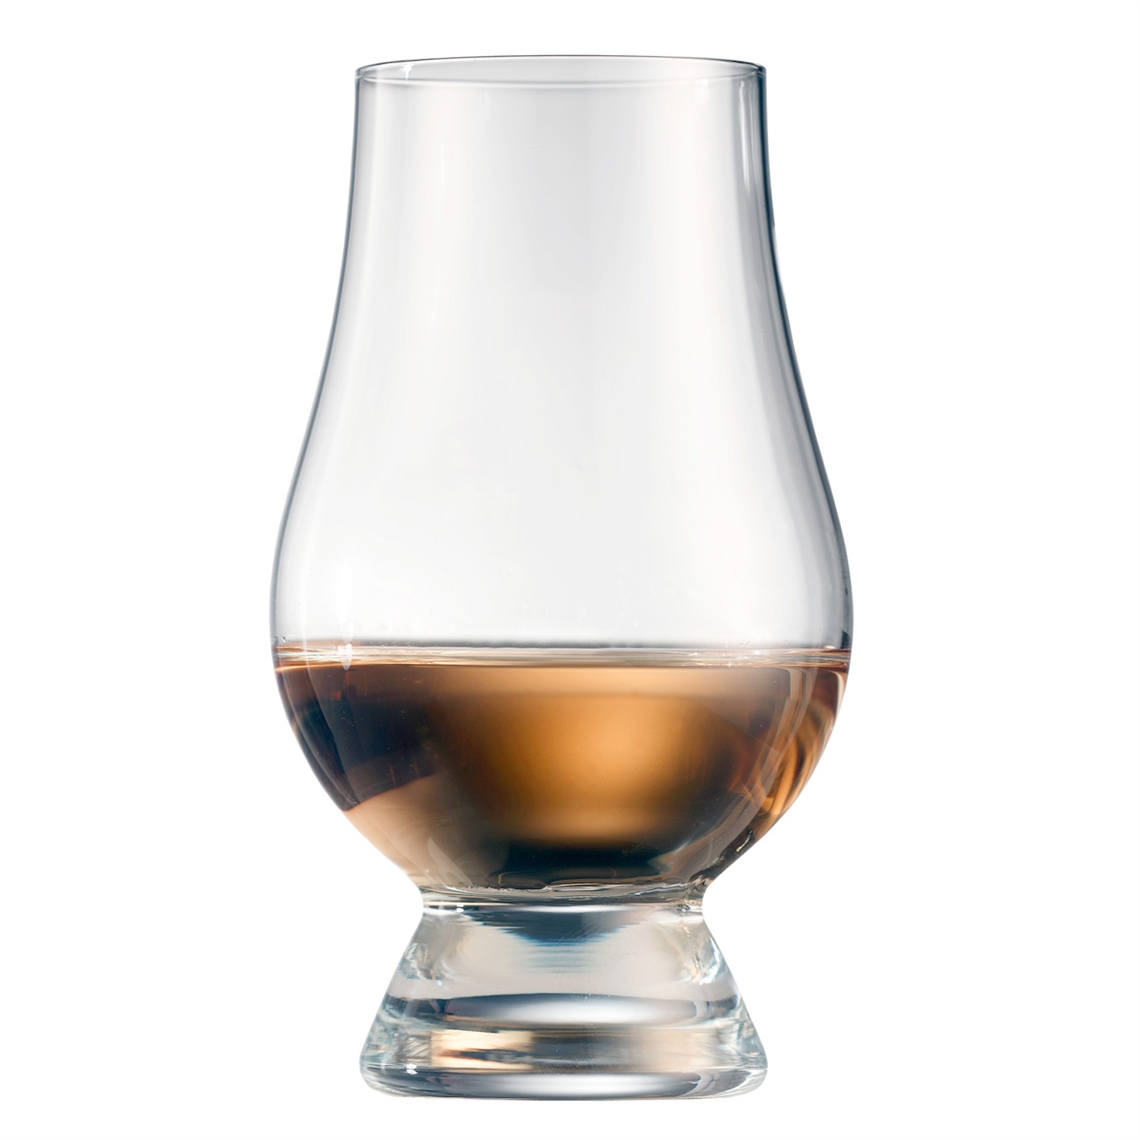 View more riedel promotions from our Whisky Glasses range